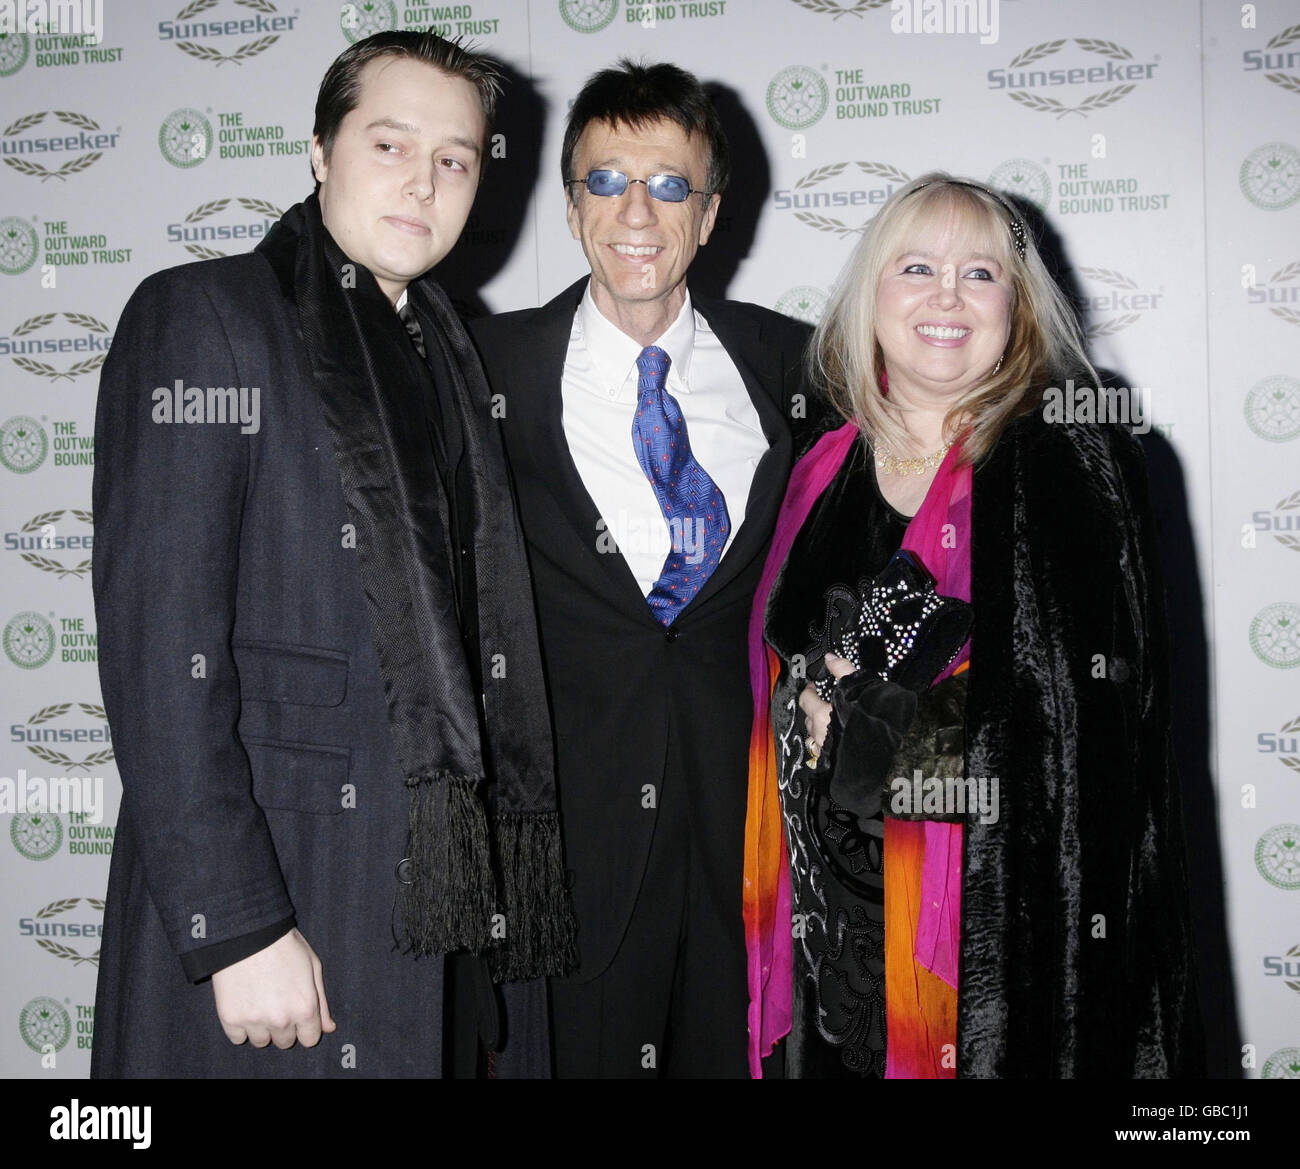 Official ambassador Robin Gibb CBE (centre) with his wife Dwina and son arriving for The Sunseeker International Charitable Trust Ball - in aid of The Outward Bound Trust - at Battersea Evolution in south London. Stock Photo